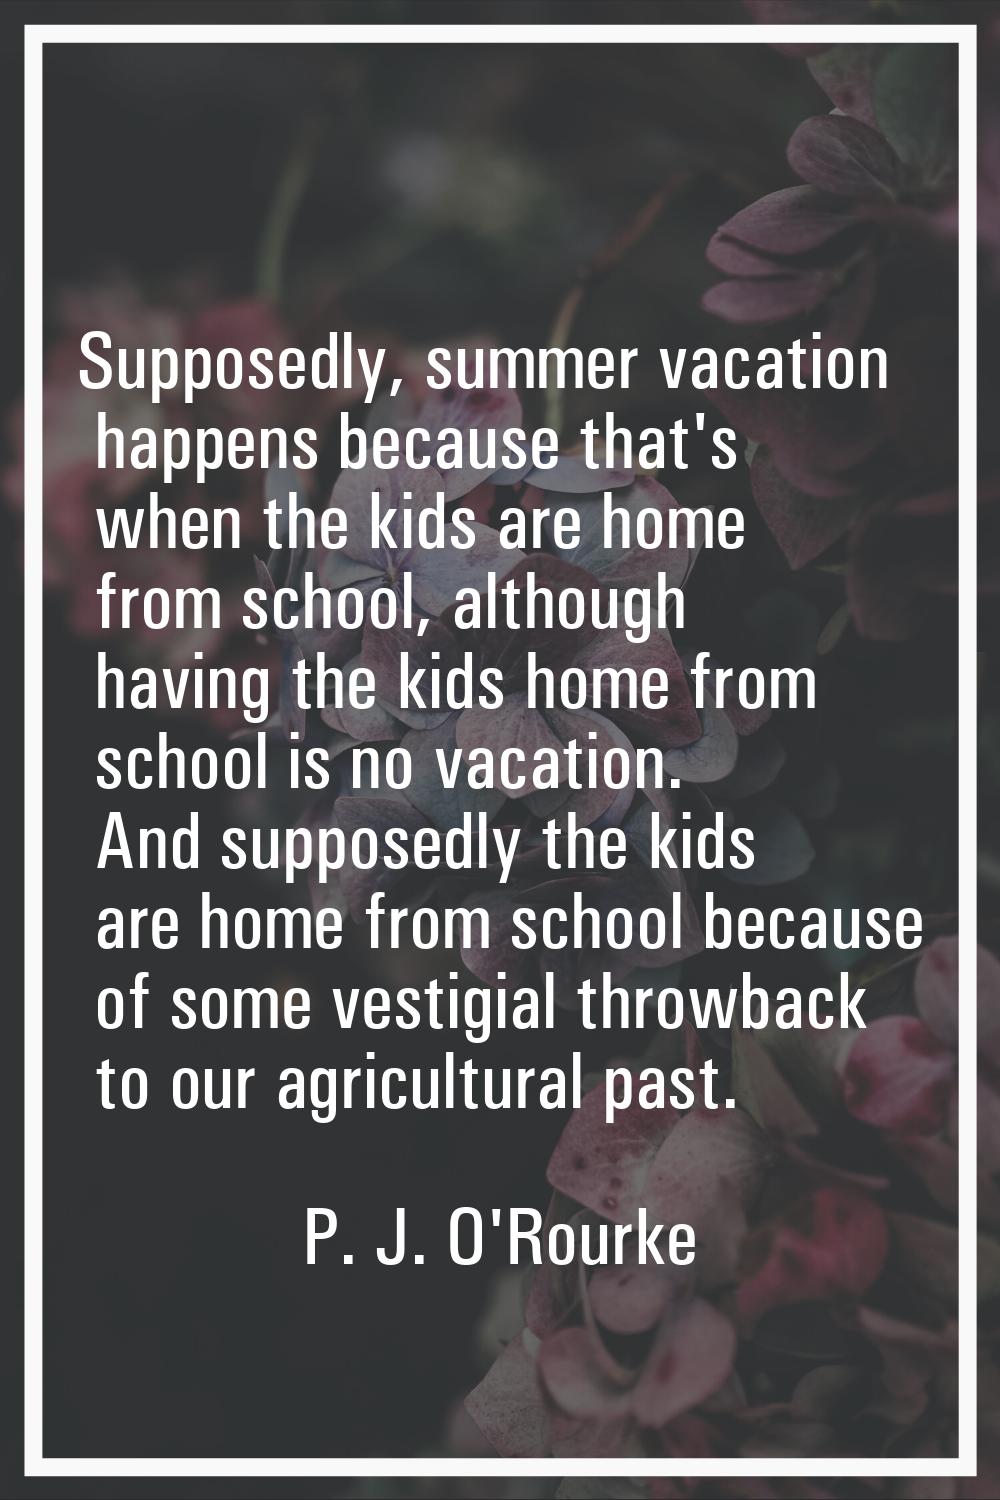 Supposedly, summer vacation happens because that's when the kids are home from school, although hav